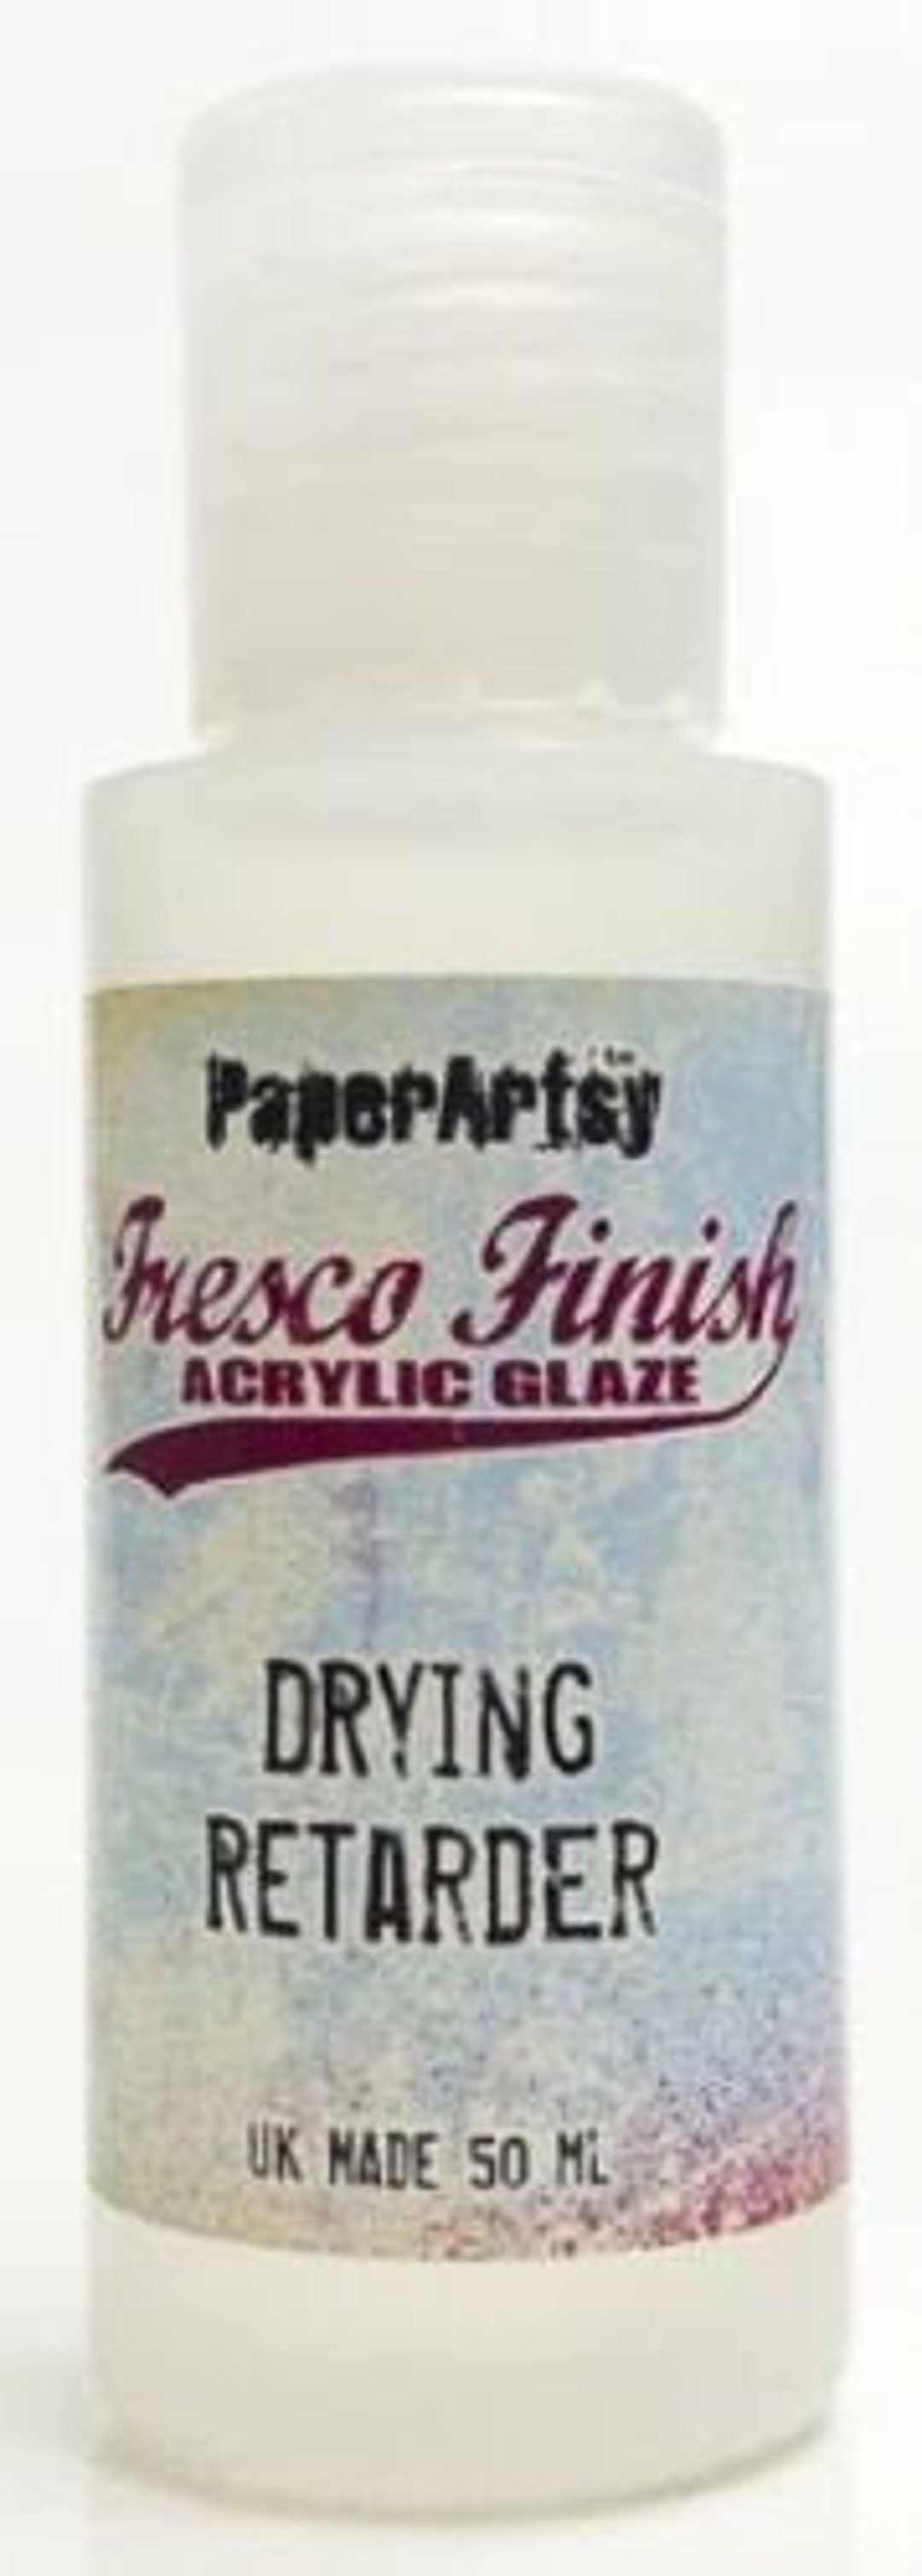 How to Use an Acrylic Paint Drying Retarder: (The Right Way) - At